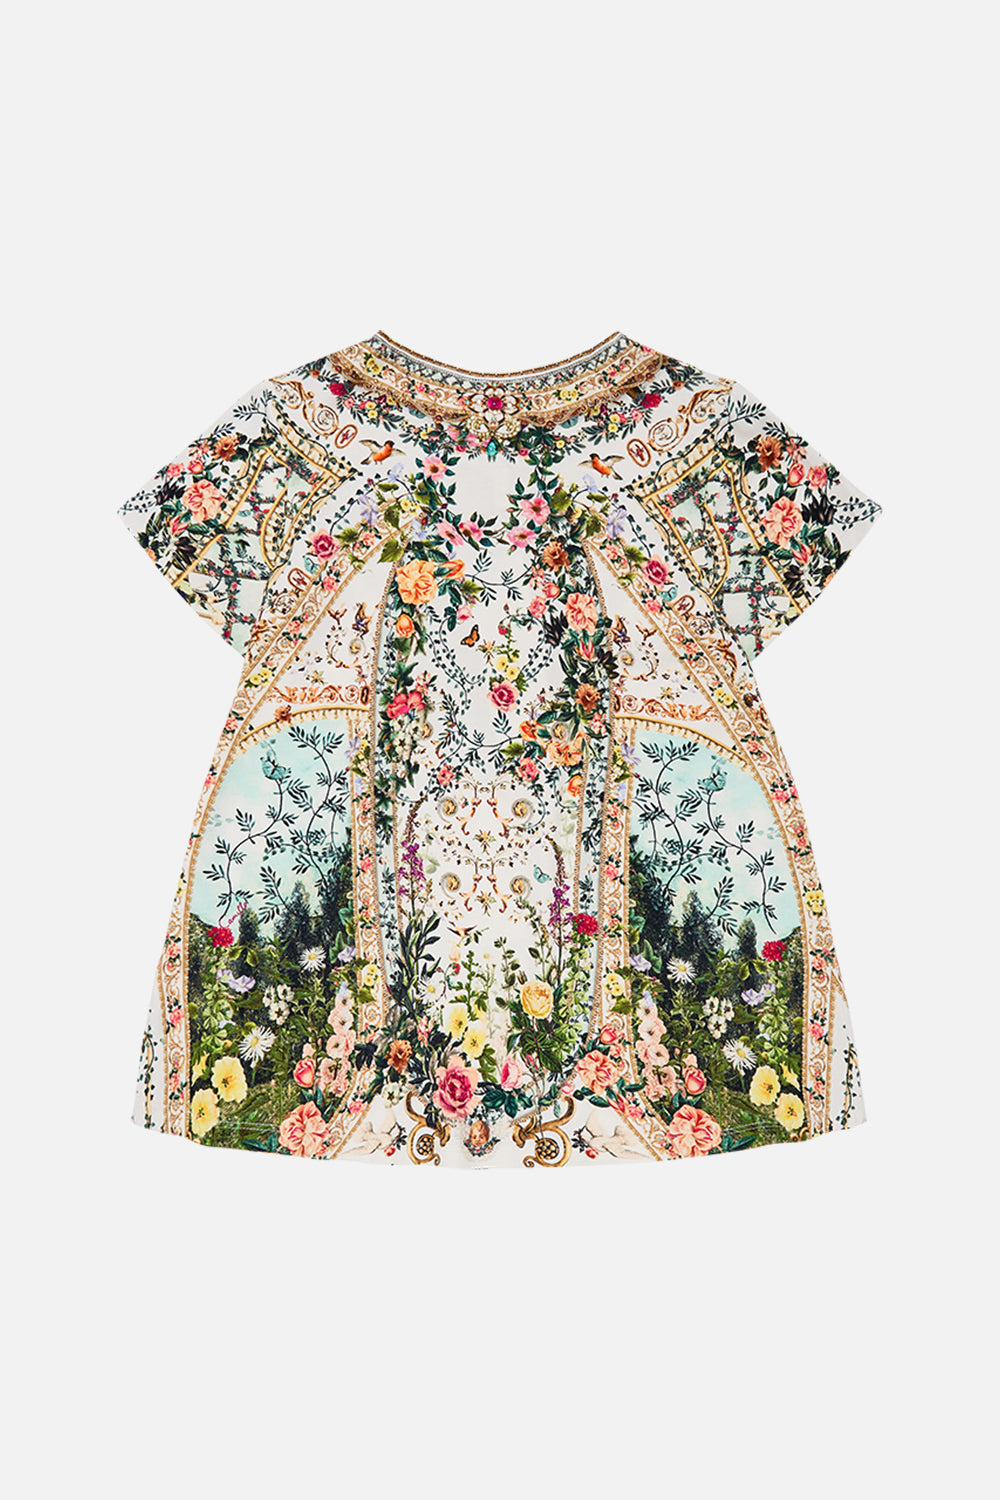 Product view of Milla By CAMILLA kids floral t shirt dress in Renaissance Romance print